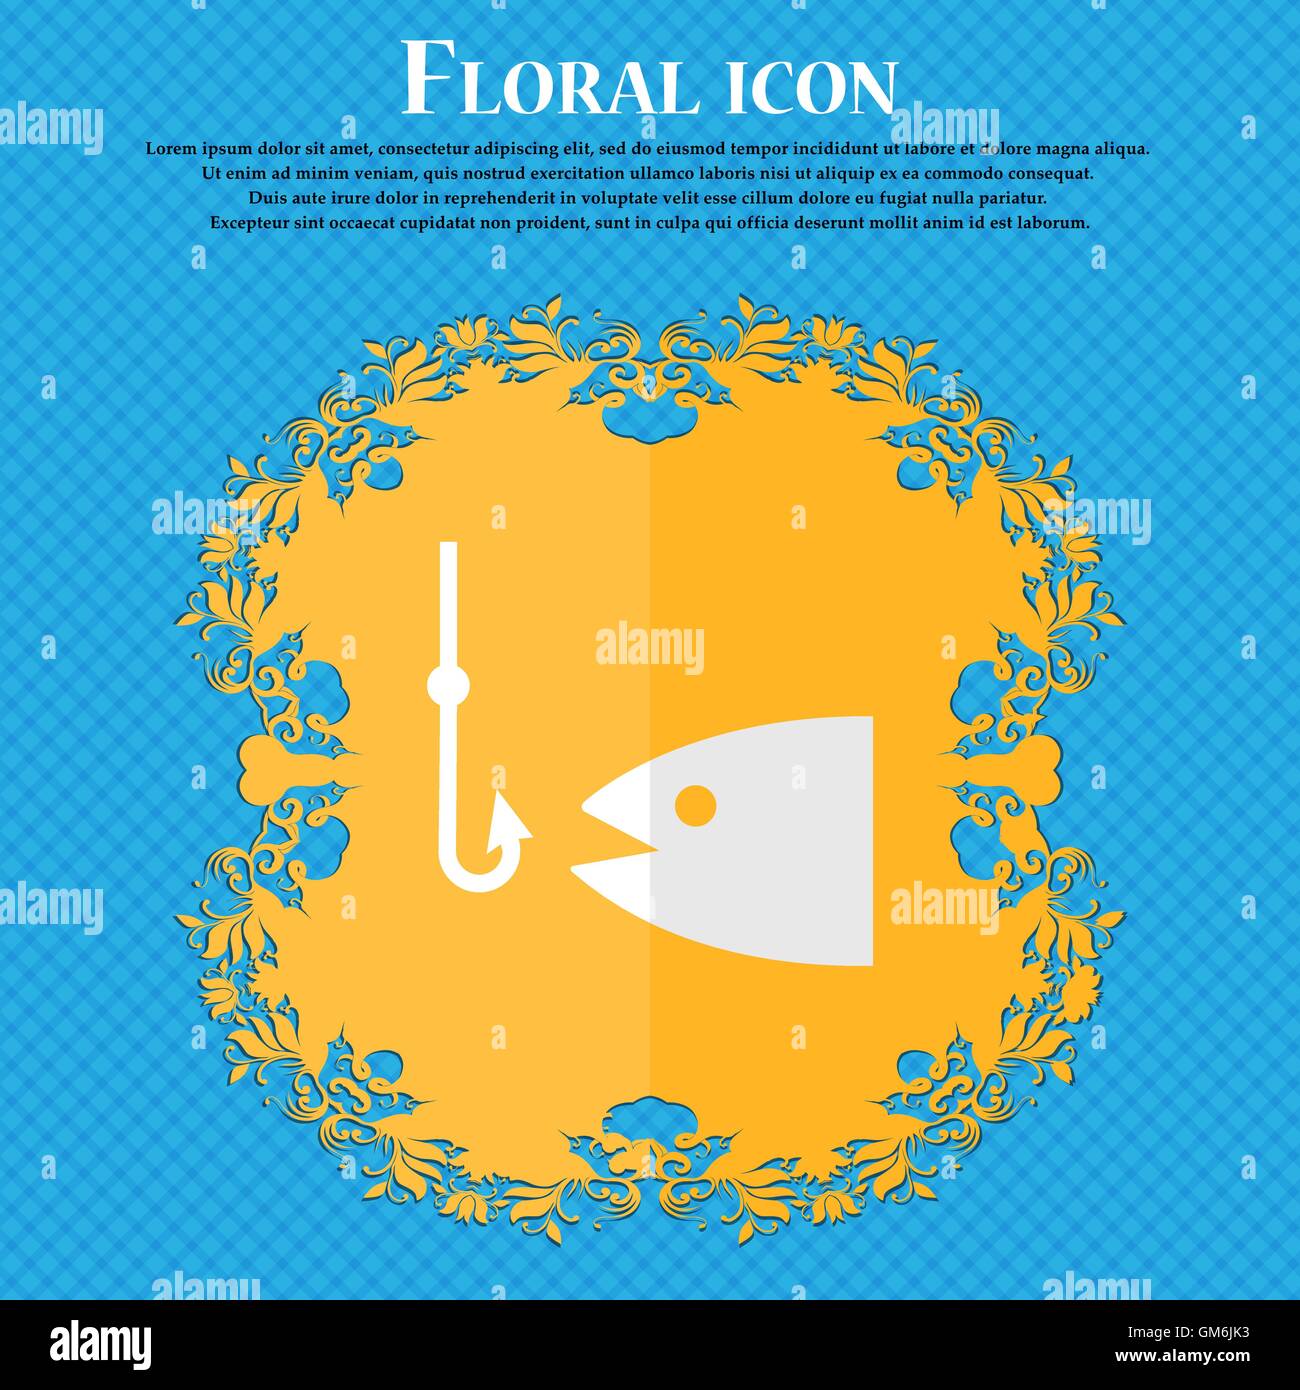 Fishing. Floral flat design on a blue abstract background with place for your text. Vector Stock Vector